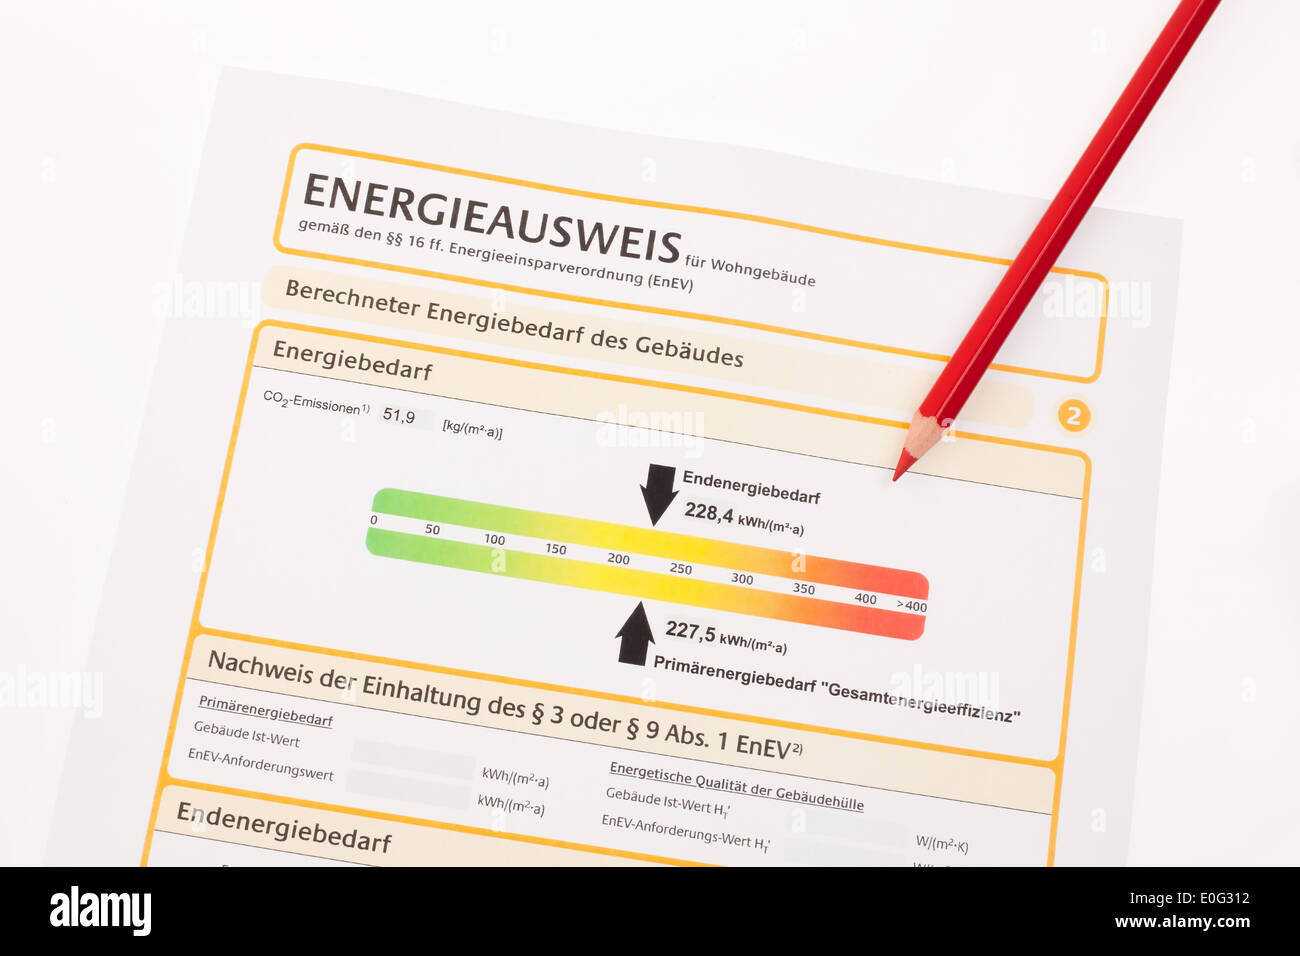 The energy identity card for single-family dwelling, Austria, Der Energieausweis fuer Einfamilienhaus, oesterreich Stock Photo